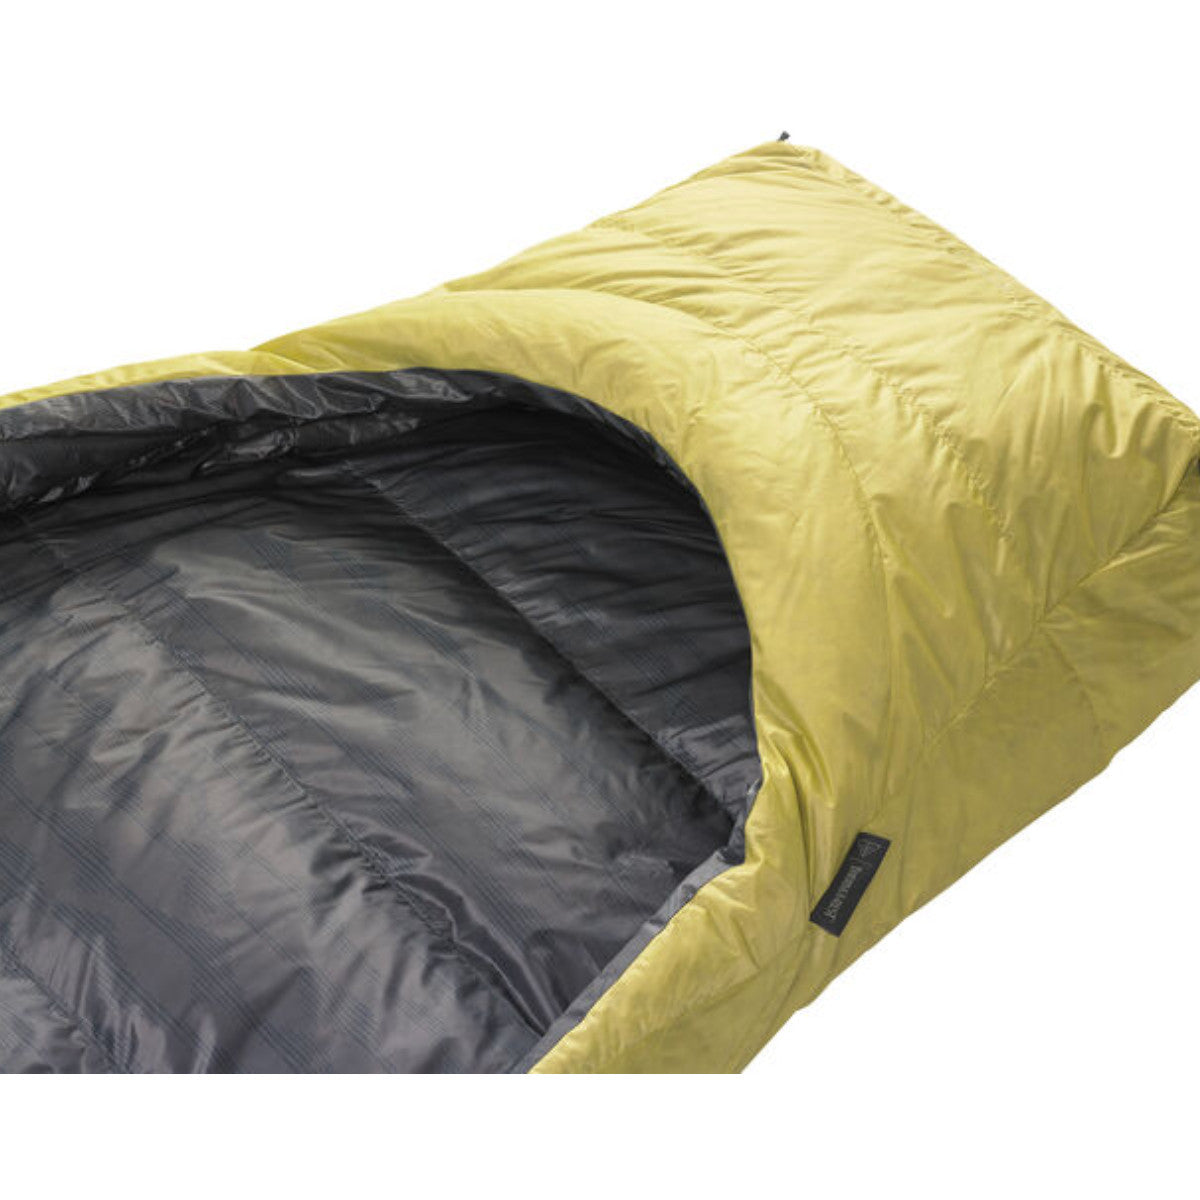 Thermarest Corus 20F/-6C Quilt in golden colour showing foot pocket